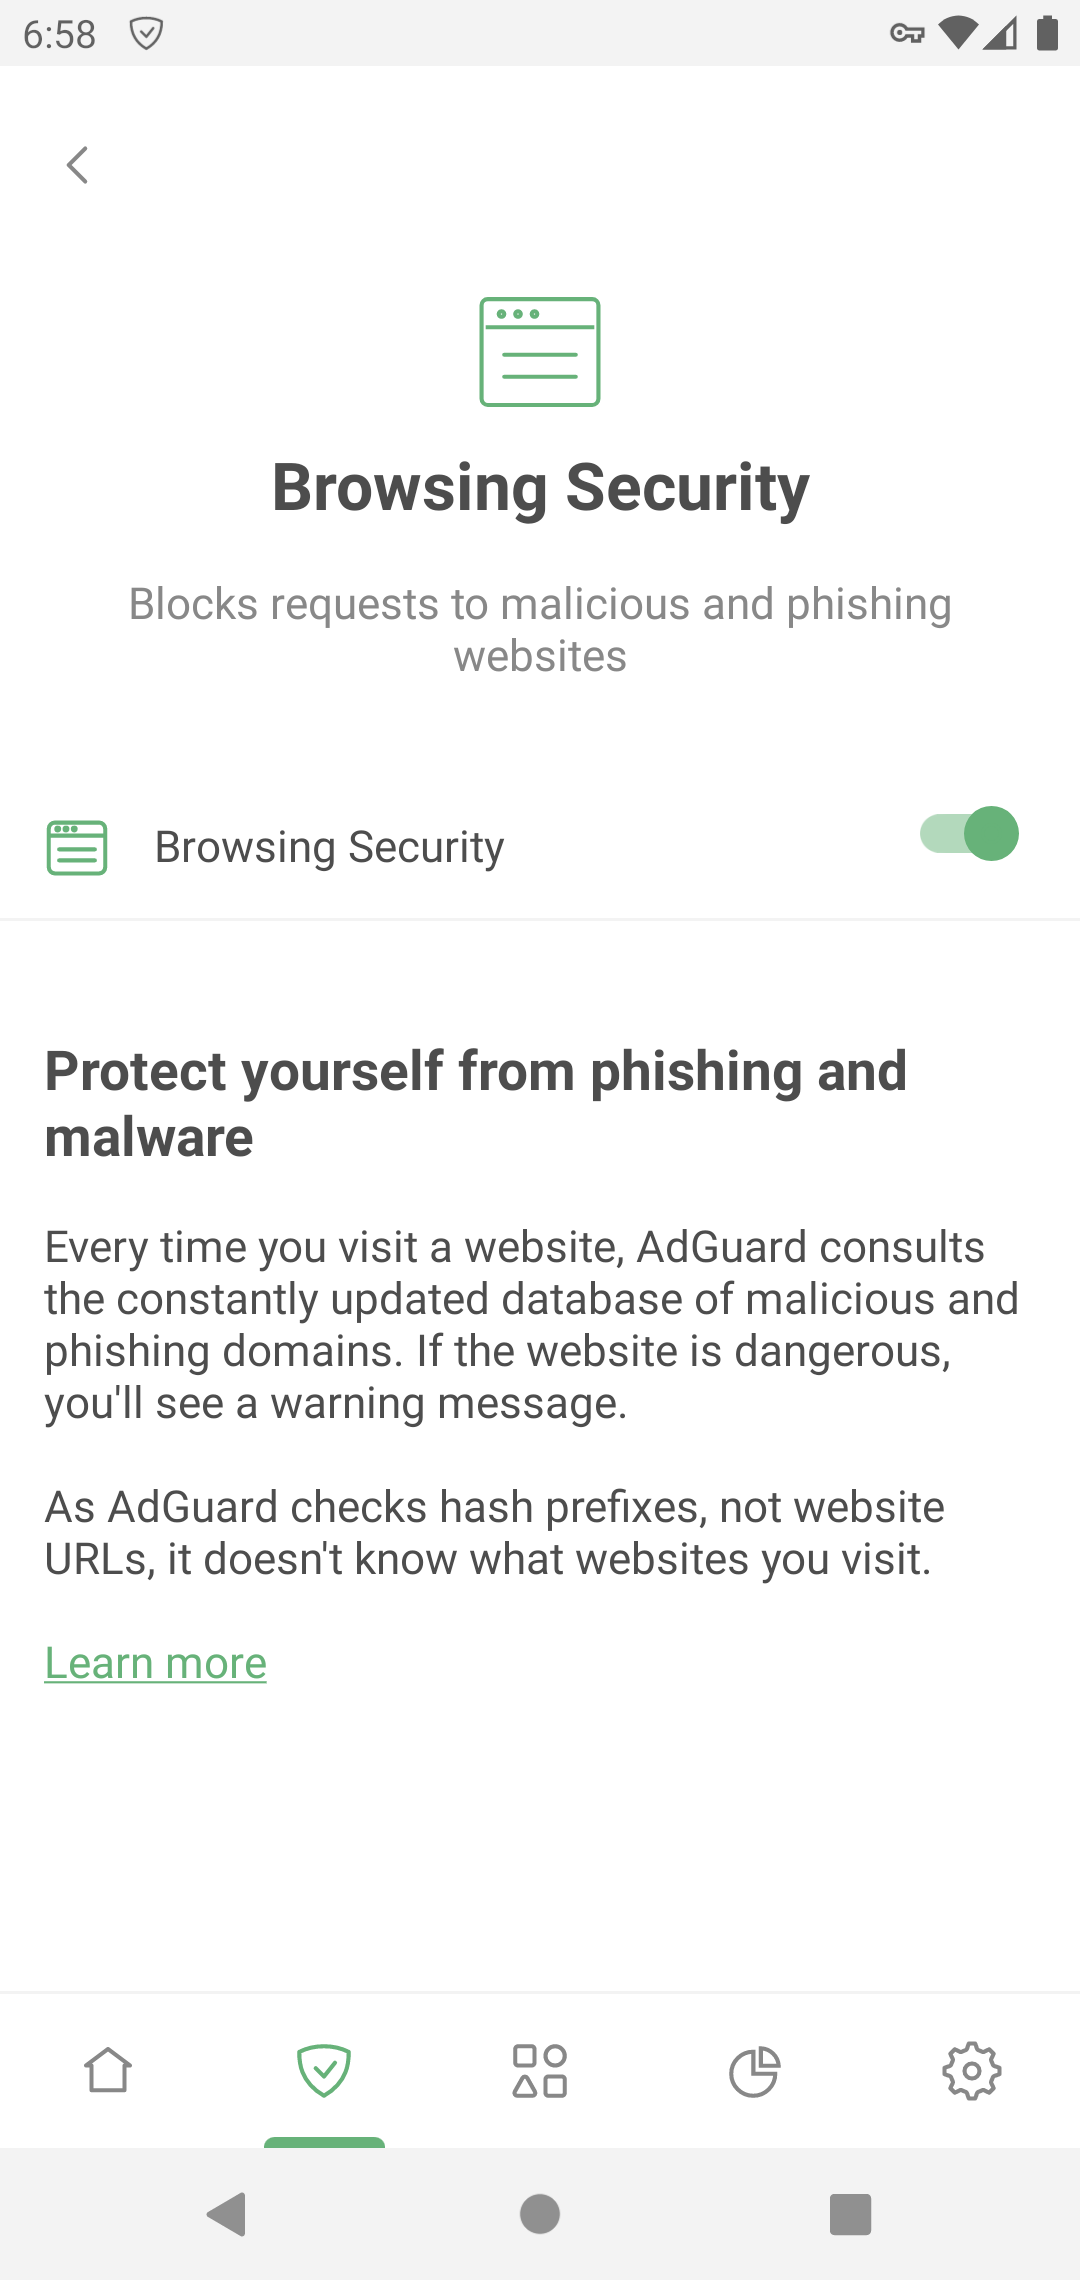 Browsing Security *mobile_border